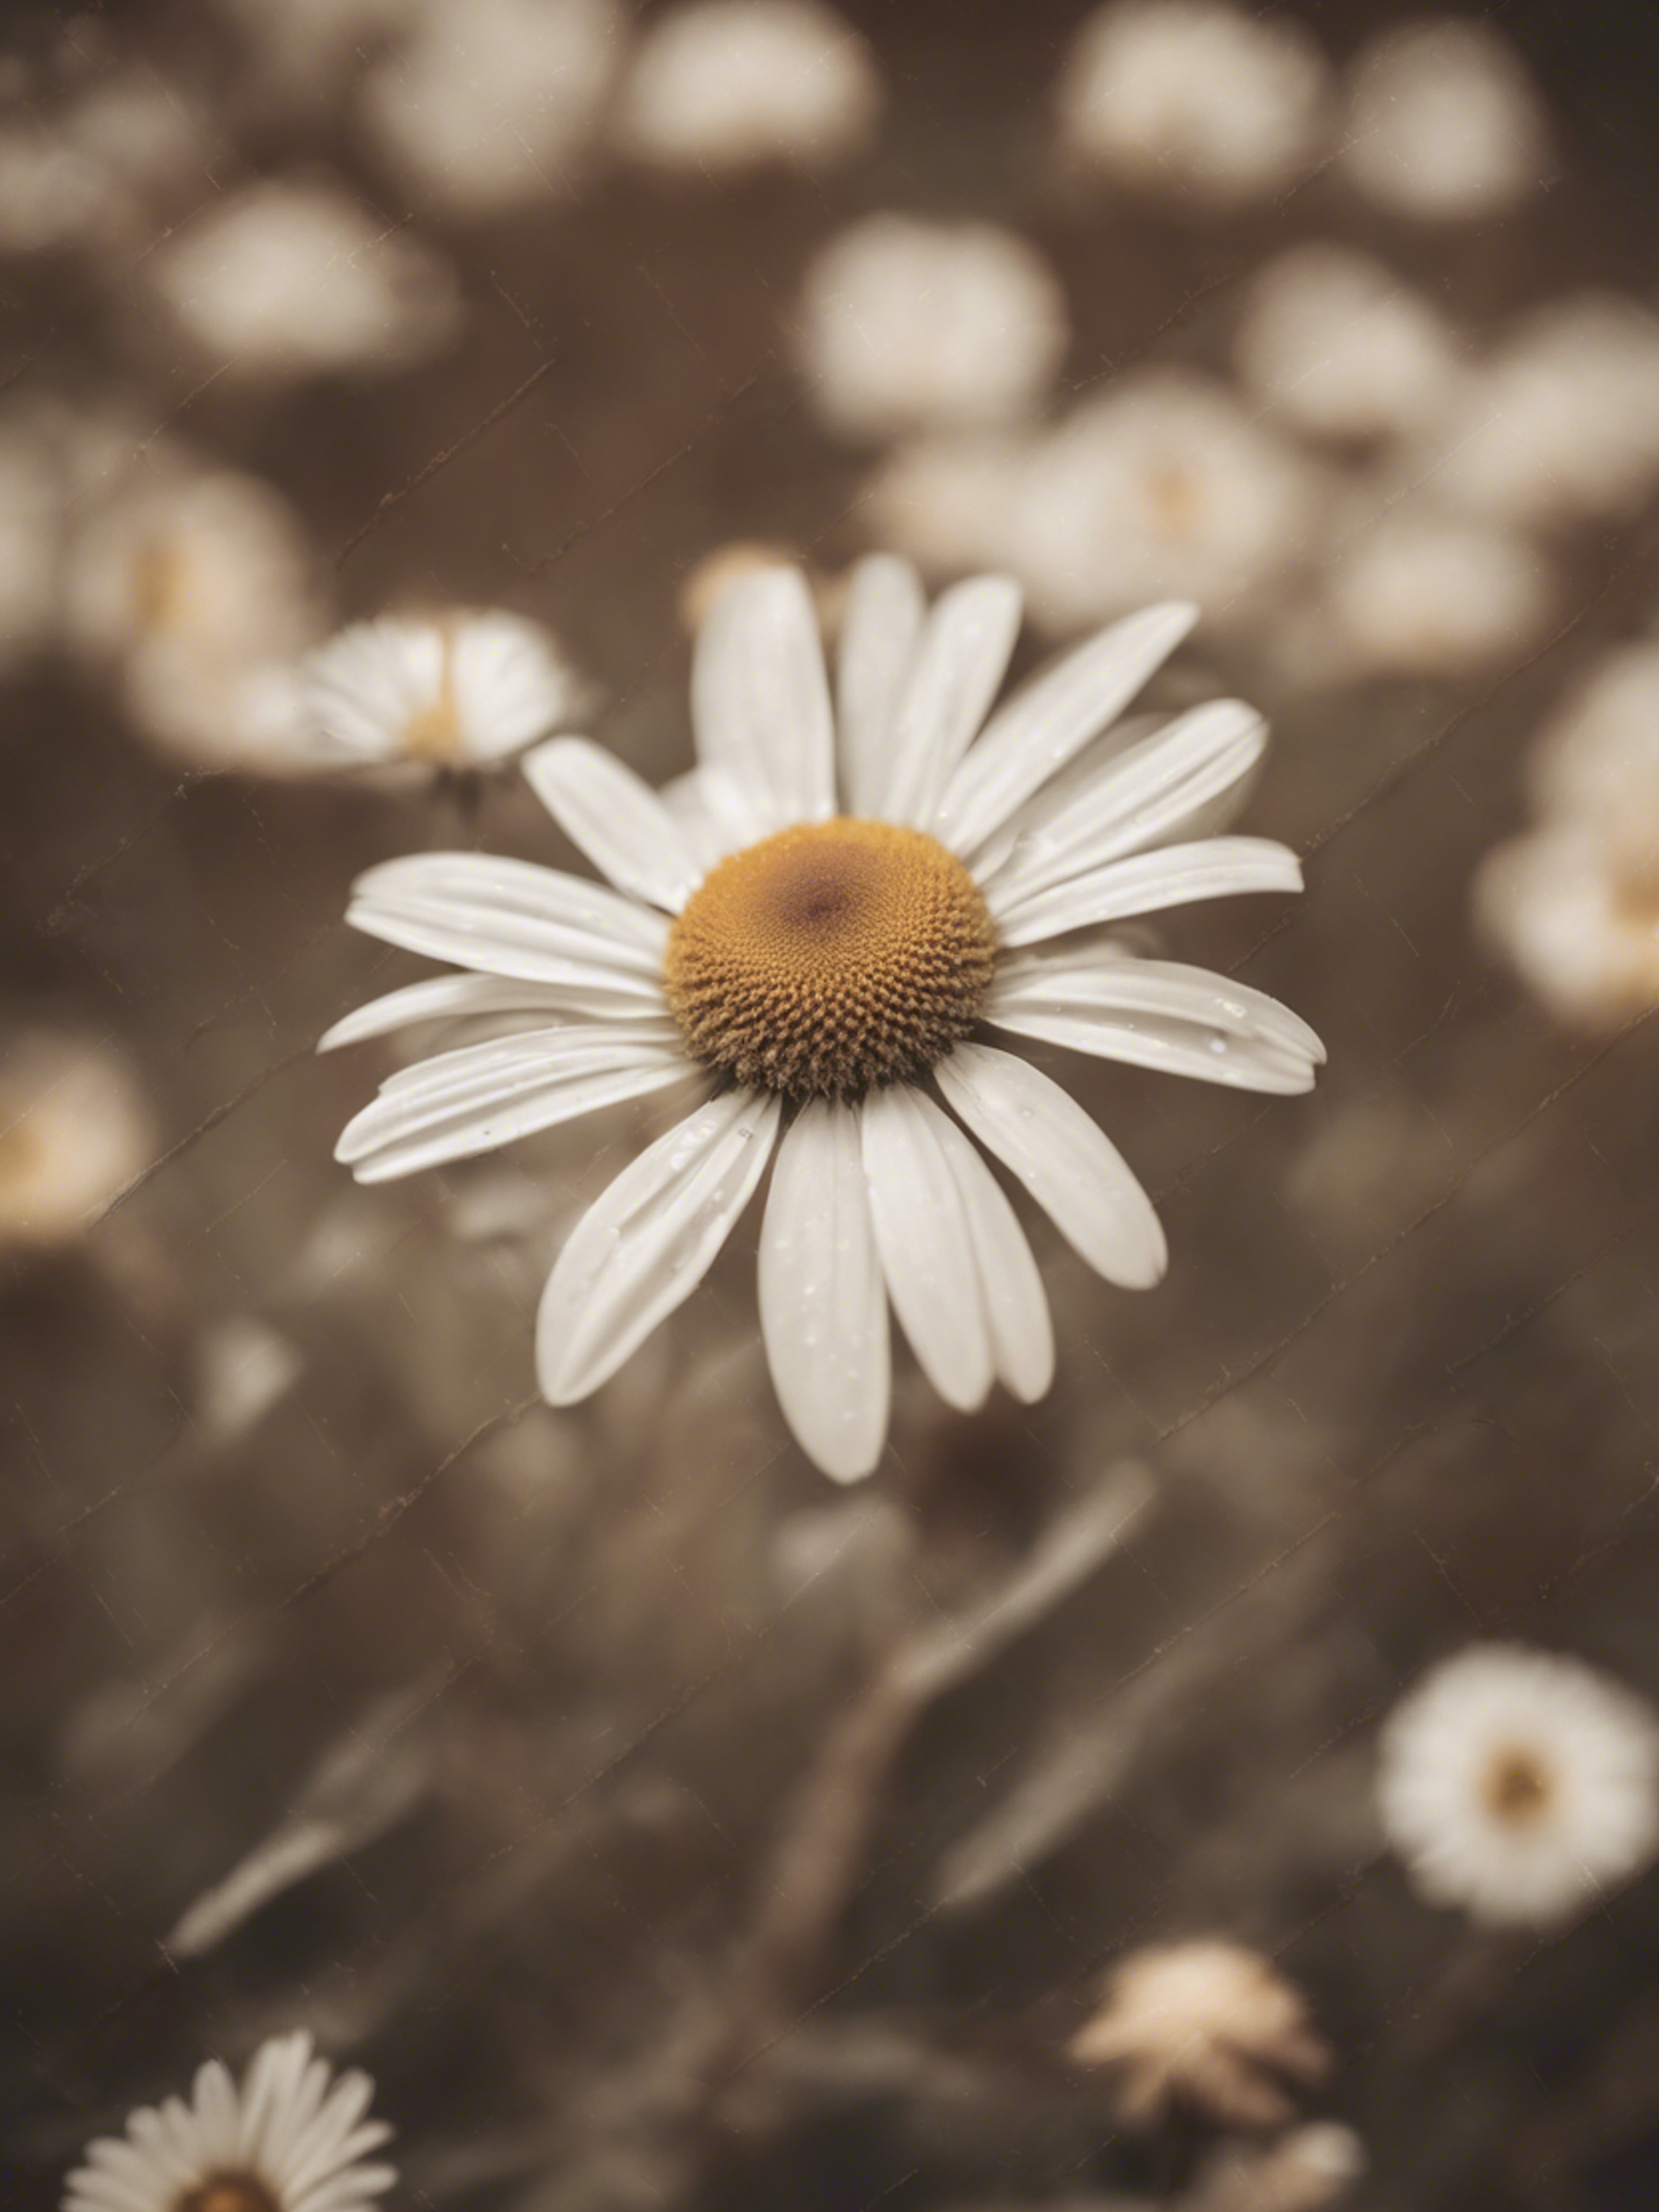 A close-up shot of a detailed vintage daisy with a retro sepia tone.壁紙[f1c39d3feb82478b9c81]